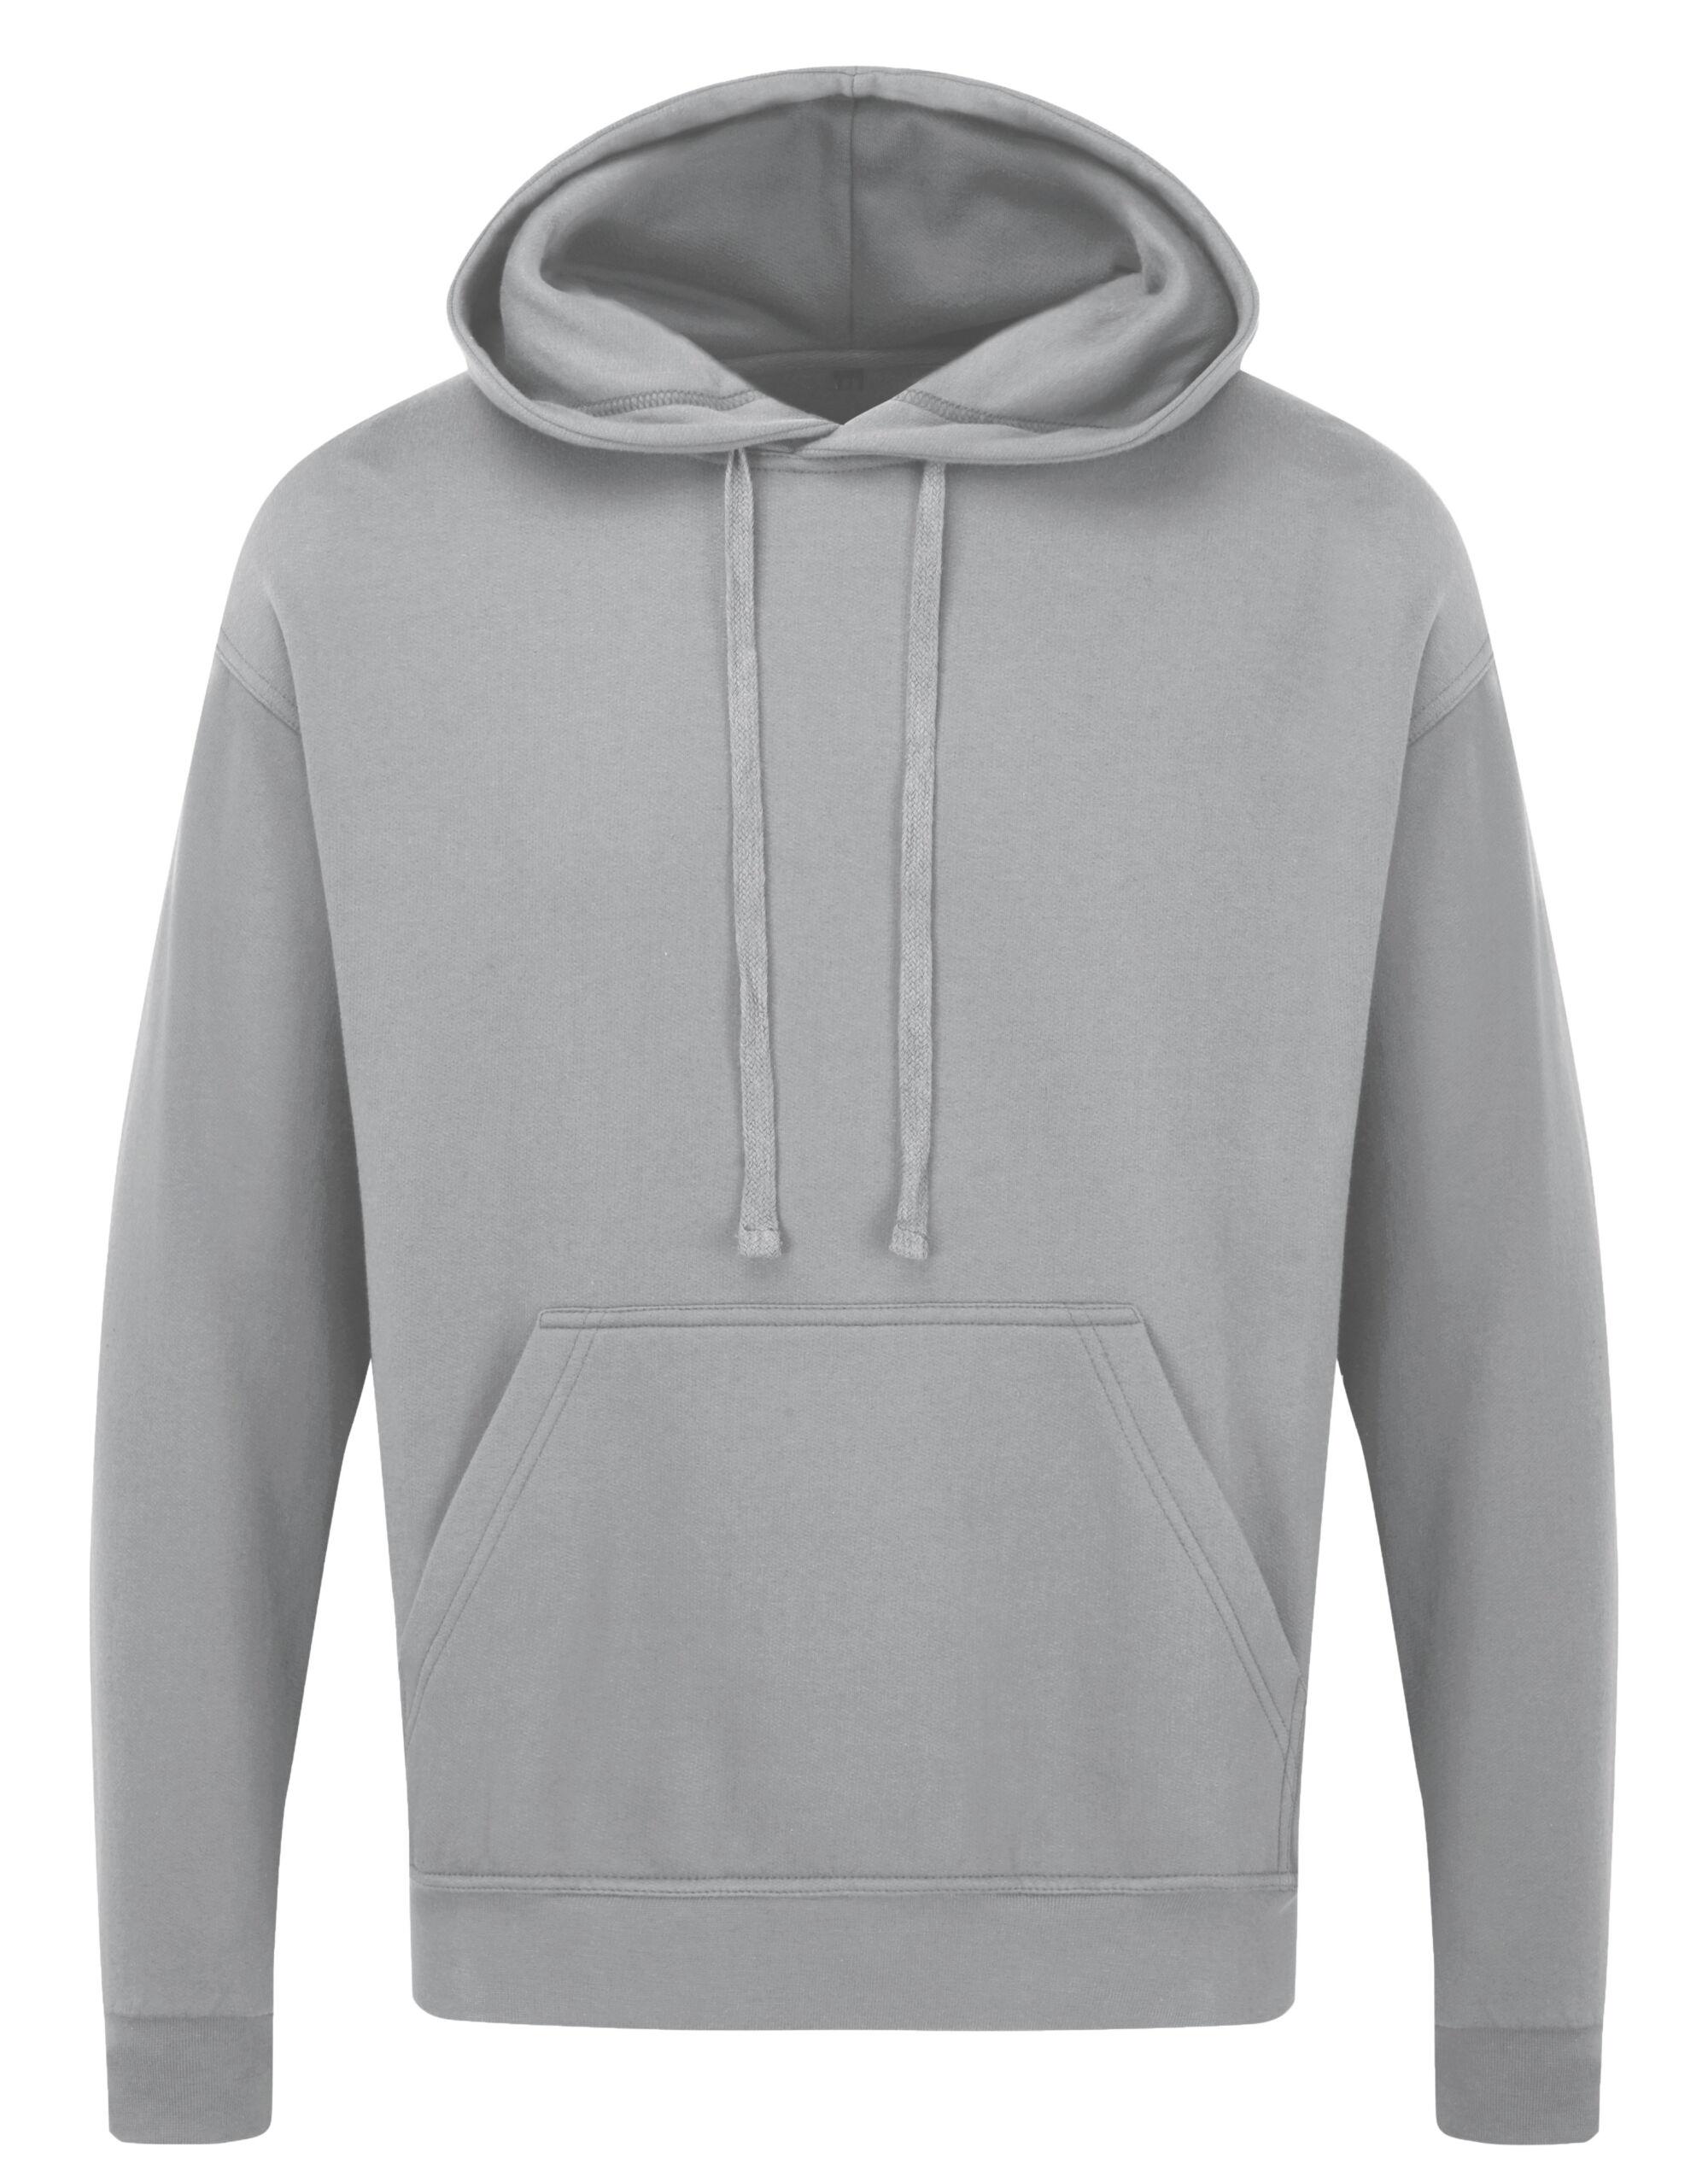 Ultimate Clothing Unisex 50/50 260gsm Hoodie in White (Product Code: UCC006)